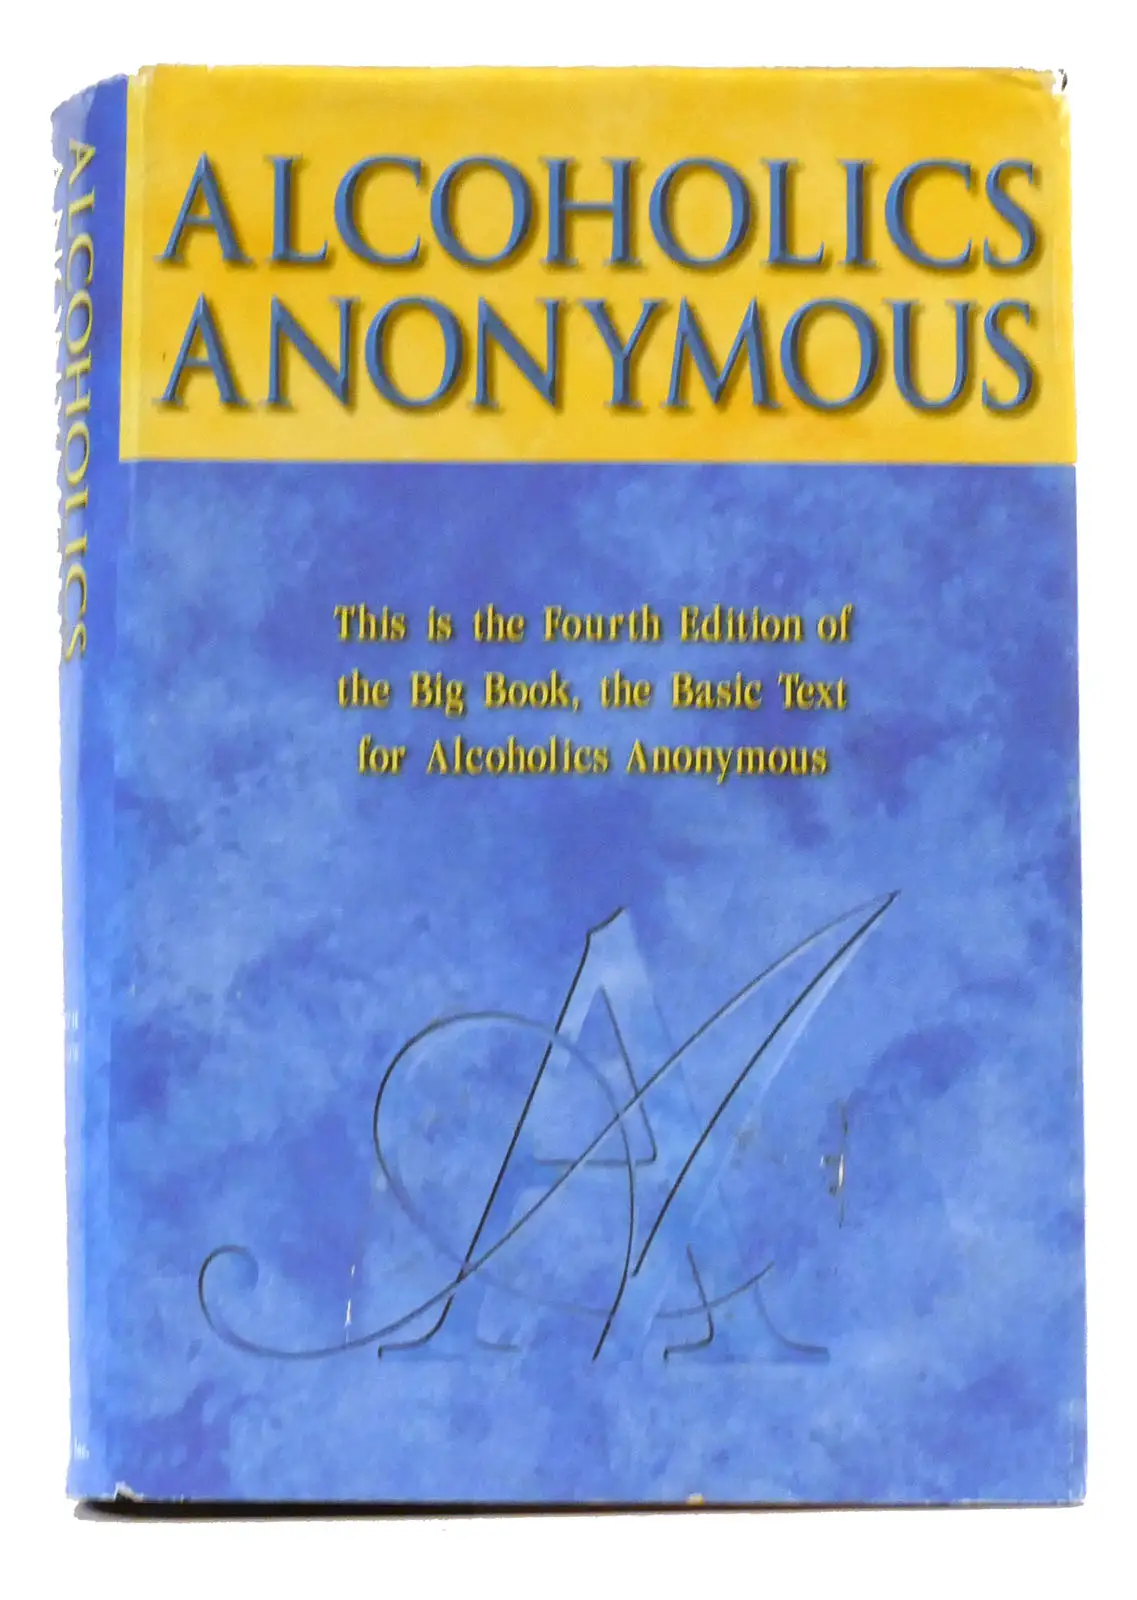 Alcoholics Anonymous 4th Edition Hardcover